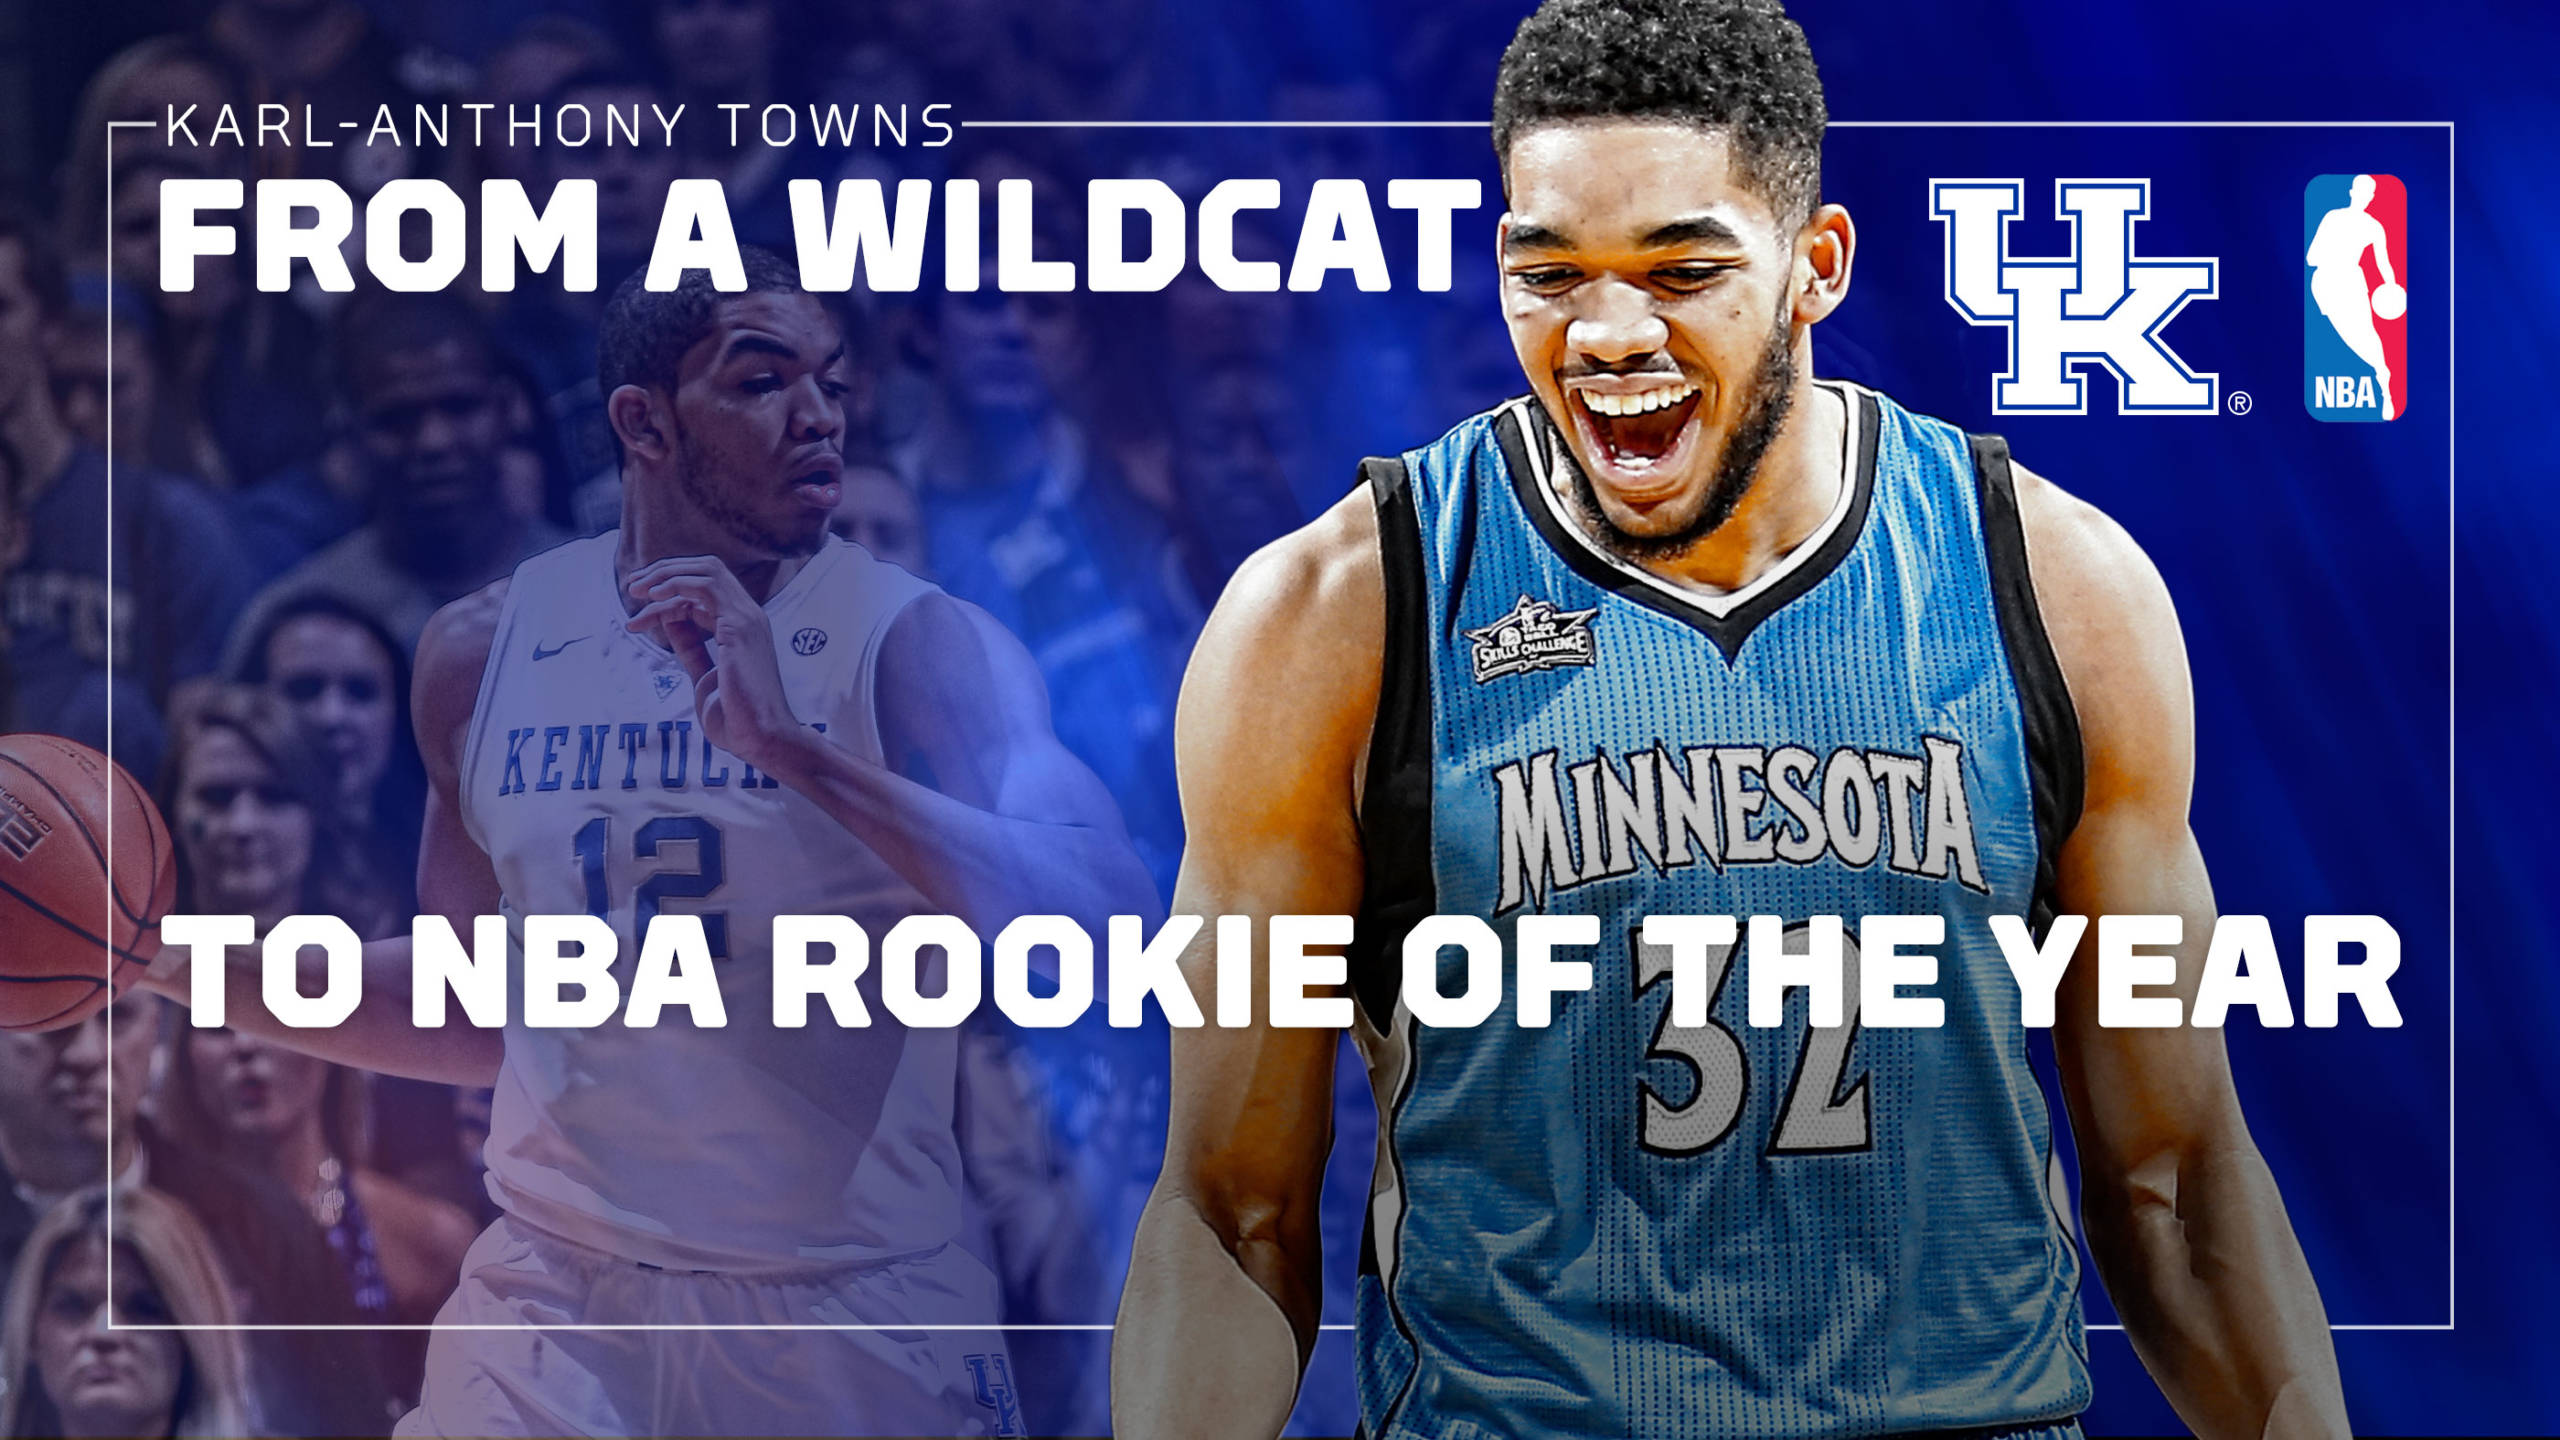 Former Wildcat Karl-Anthony Towns Named NBA Rookie of the Year